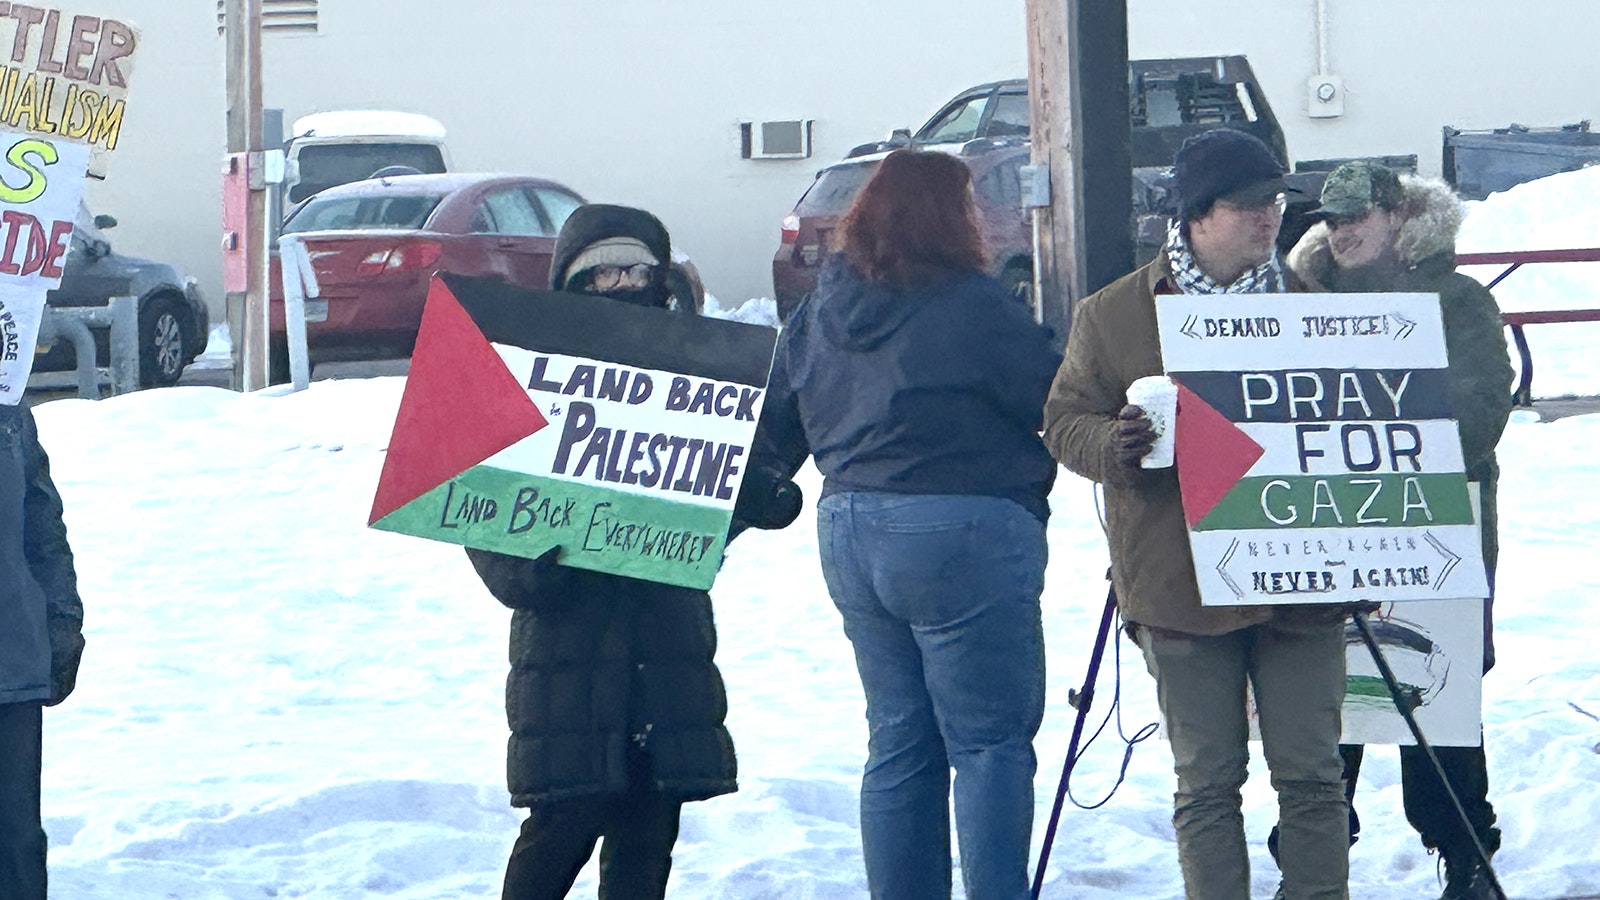 A group of pro-Palestine protesters have been demonstrating in Lander.